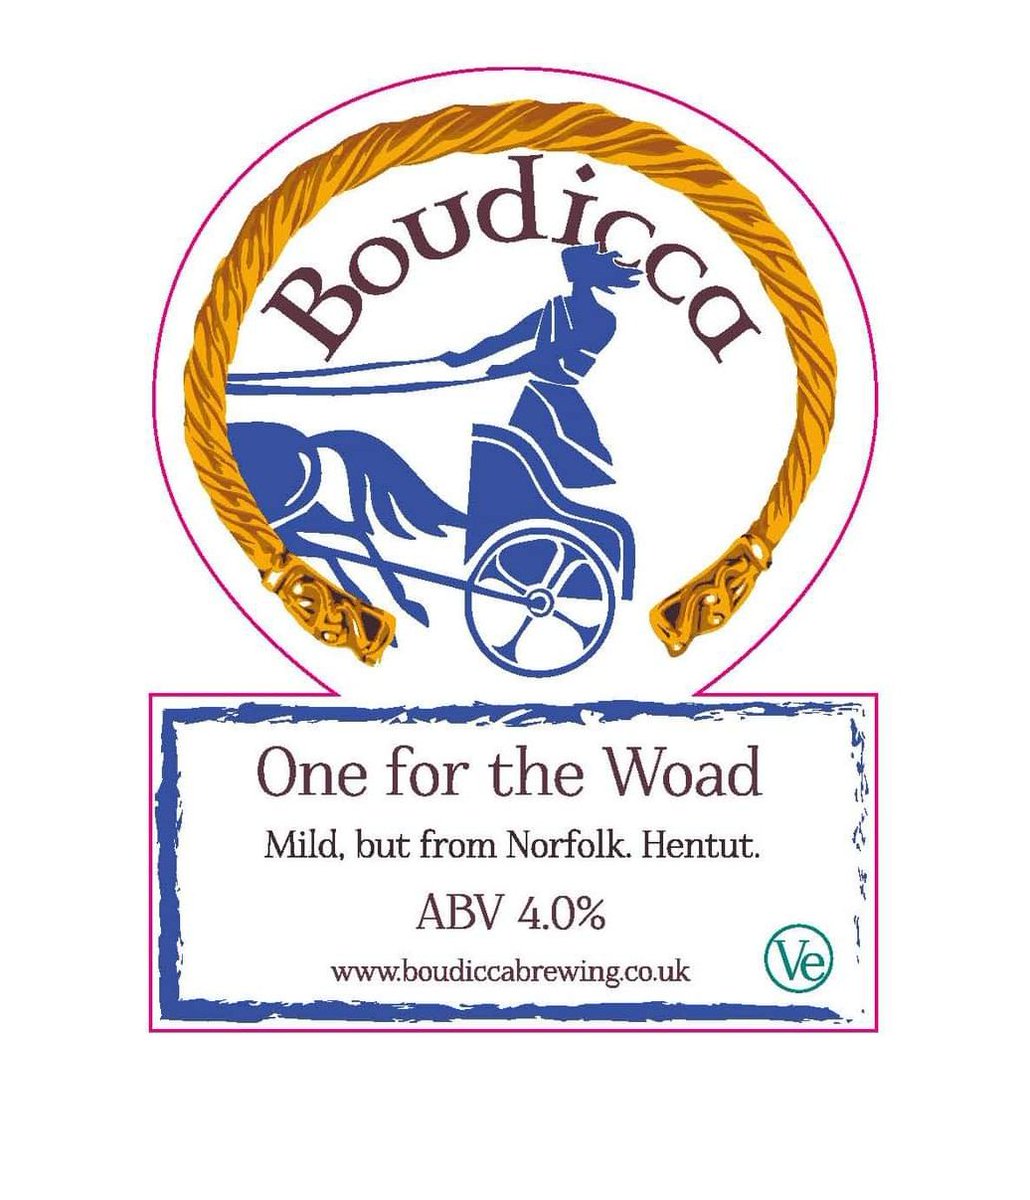 #NewBeerAlert Very excited to announce our new 4% dark beer - One For the Woad! It's a blend 10 malts & 4 hops and is very easy drinking. 
Available in cask from this week!
#MildForMay #RealAle #VeganBeer #WarriorWoad